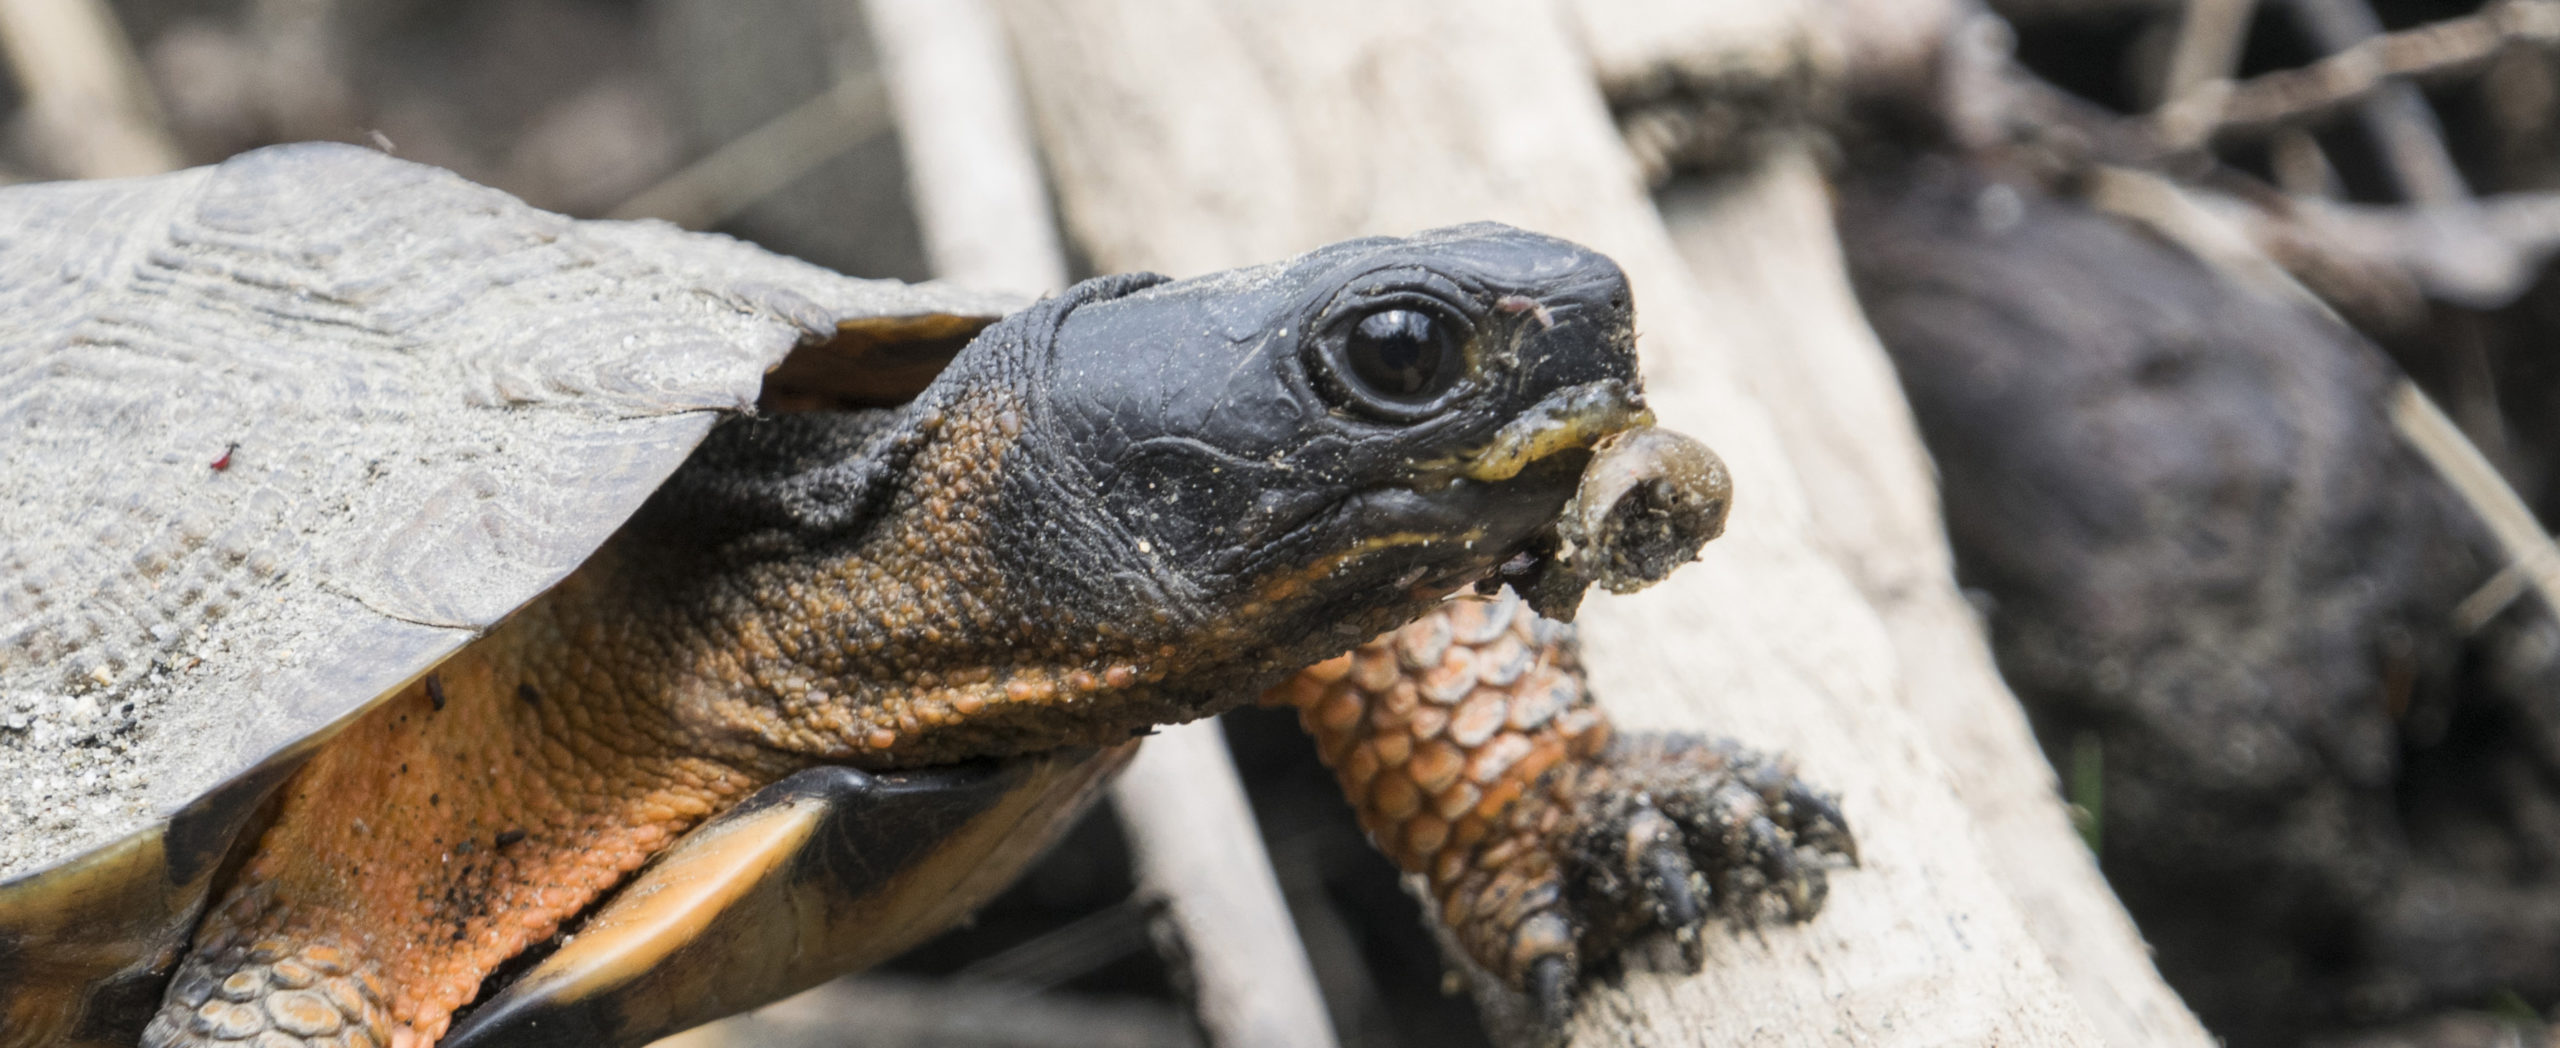 On Snails and Slugs: A Wood Turtle's Perspective - The Orianne Society